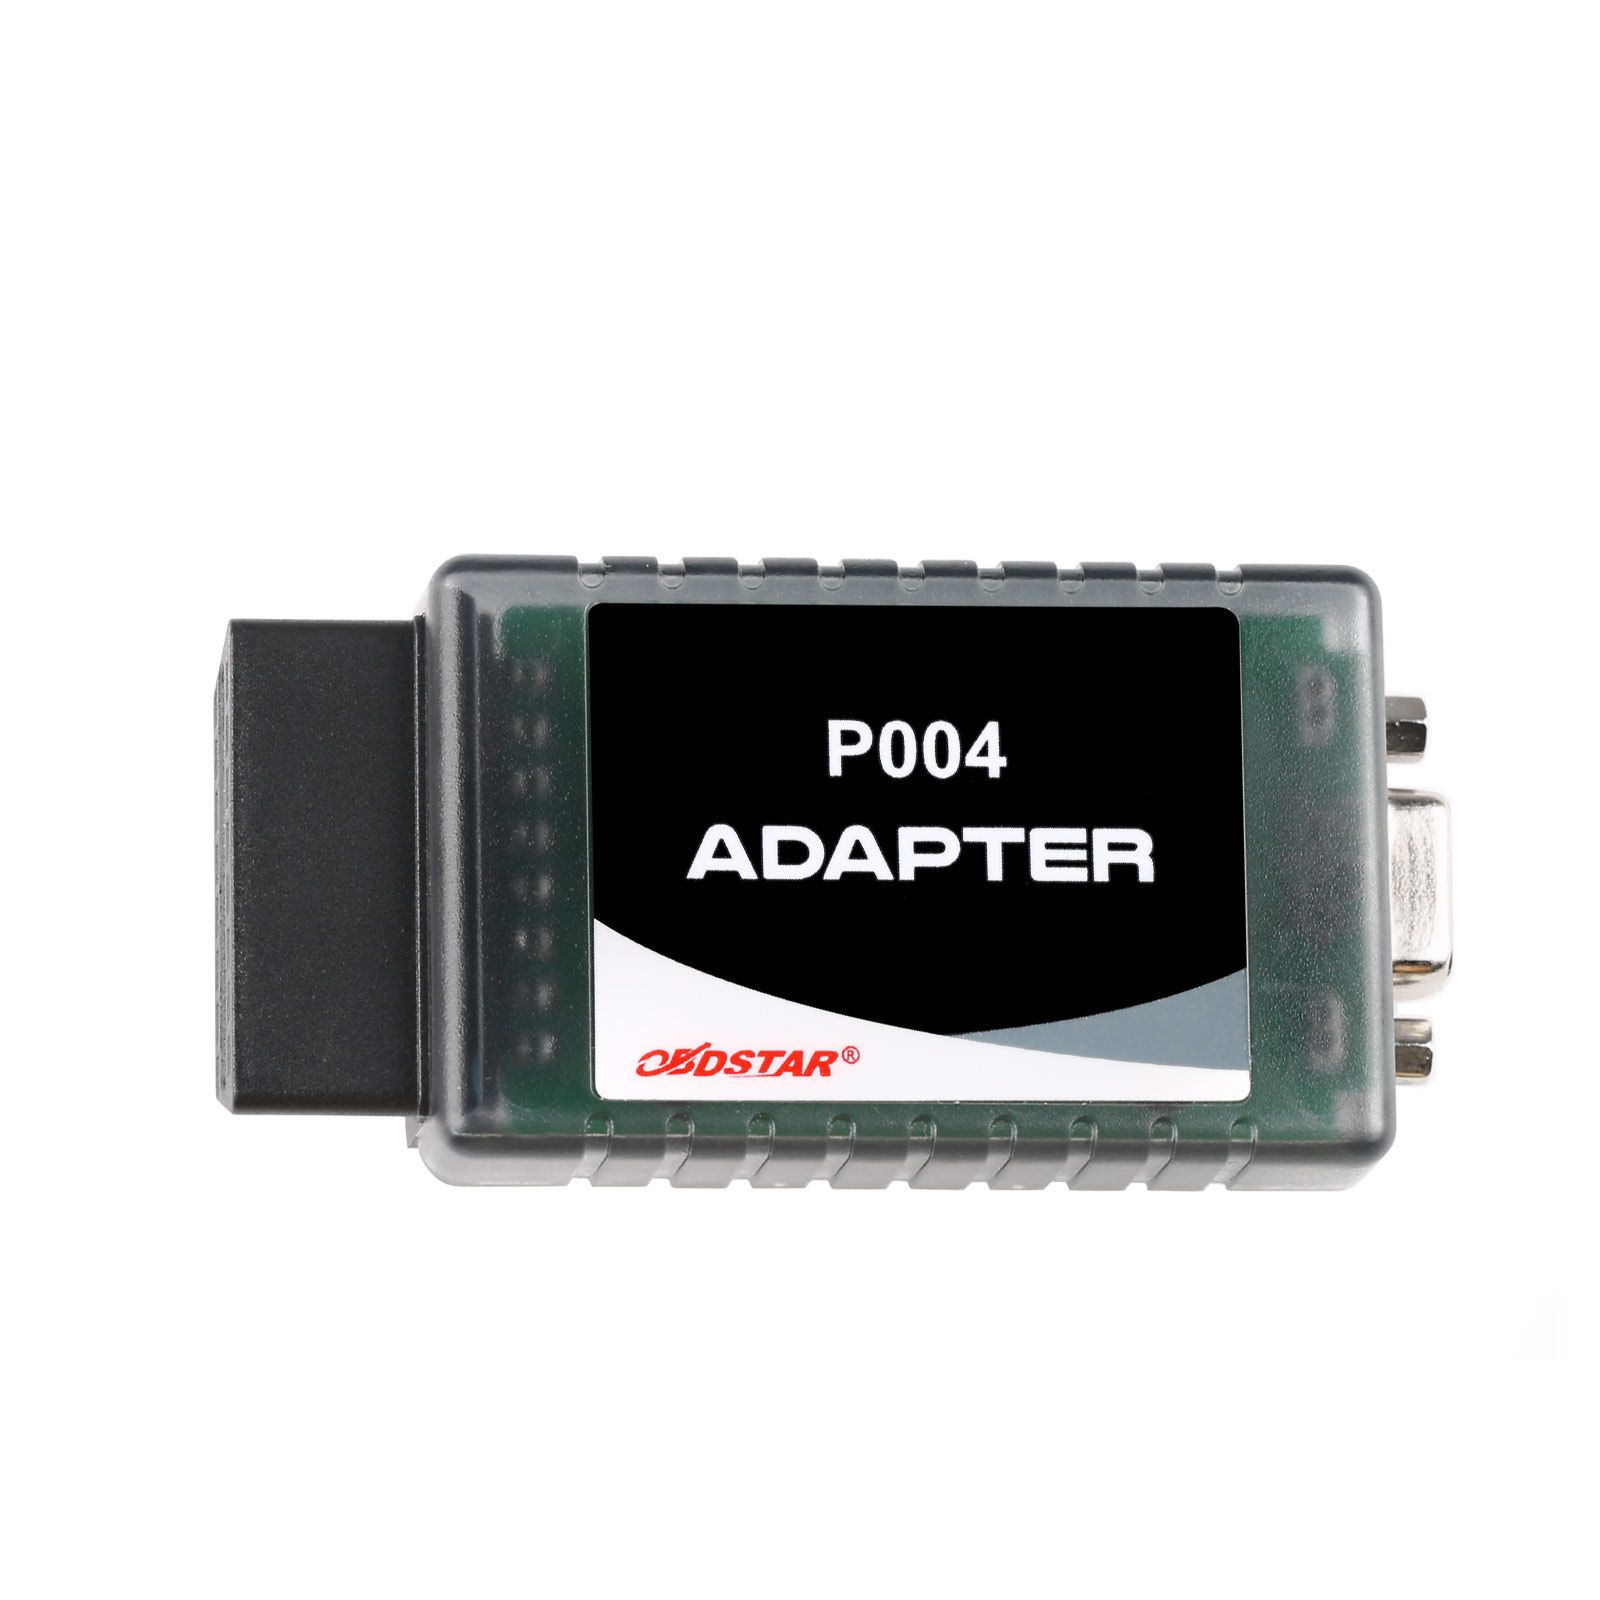 OBDSTAR Airbag Reset Software Authorization Plus P004 Adapter and Jumper Cable for OBDSTAR Odo Master Full Version